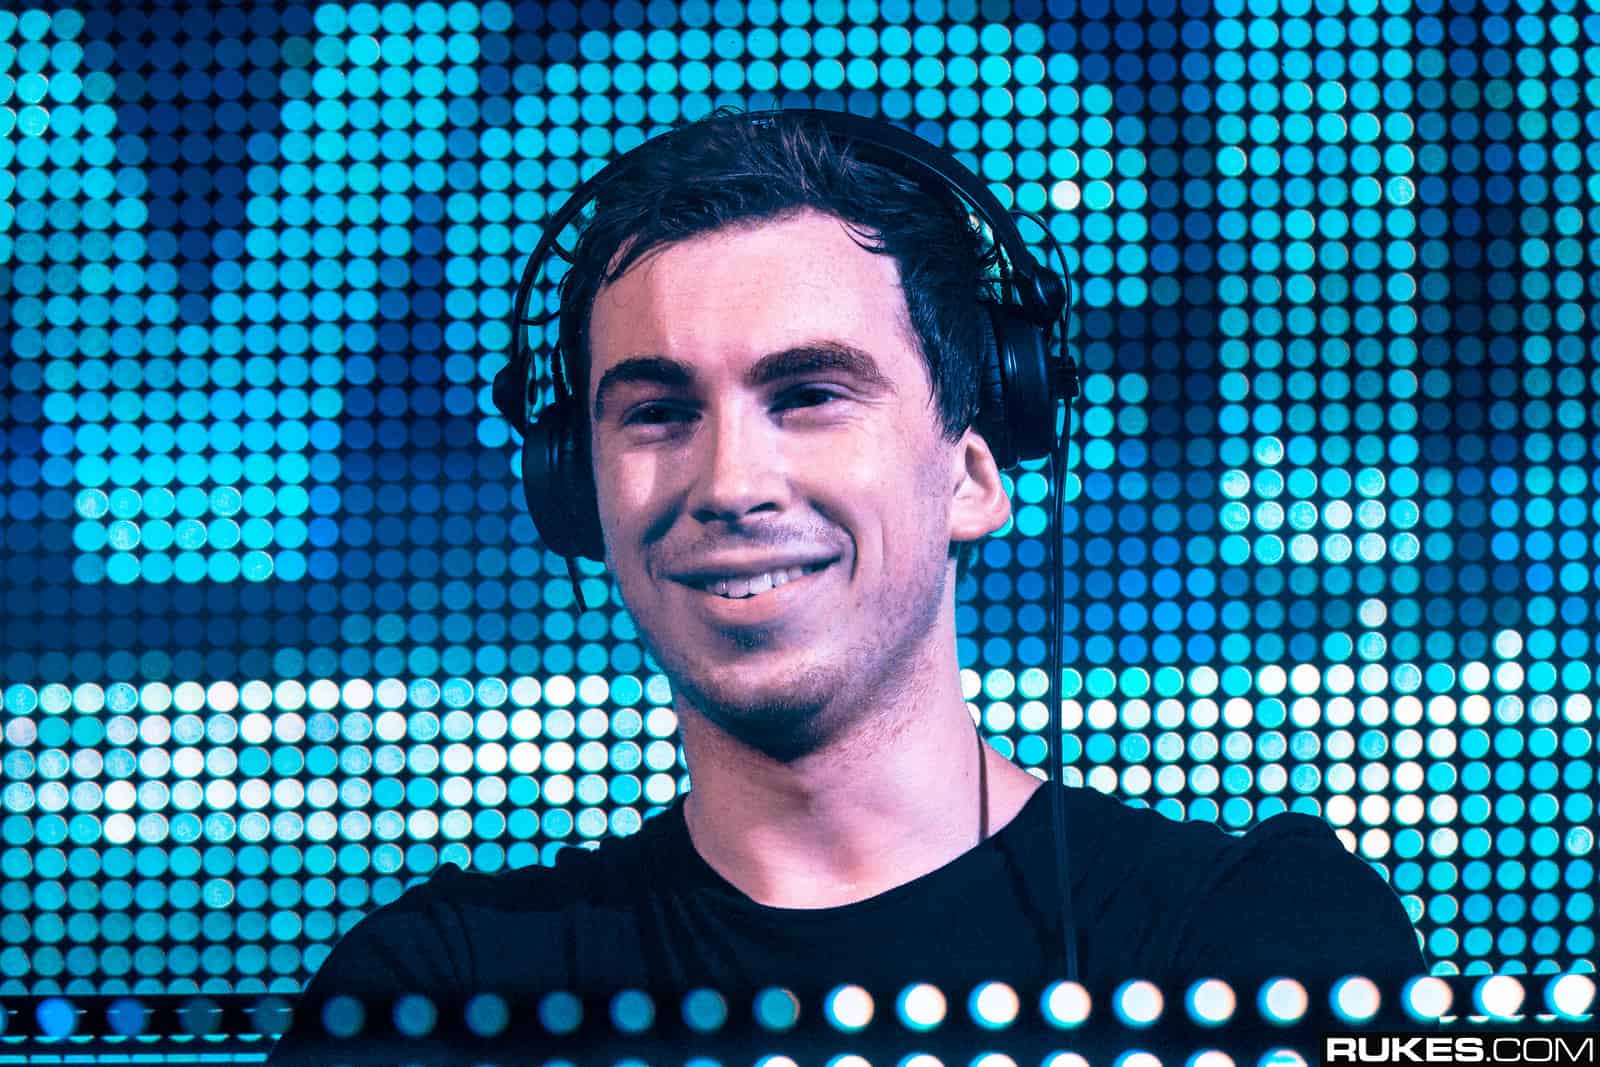 Hardwell classic ‘Spaceman’ turns 11 years old